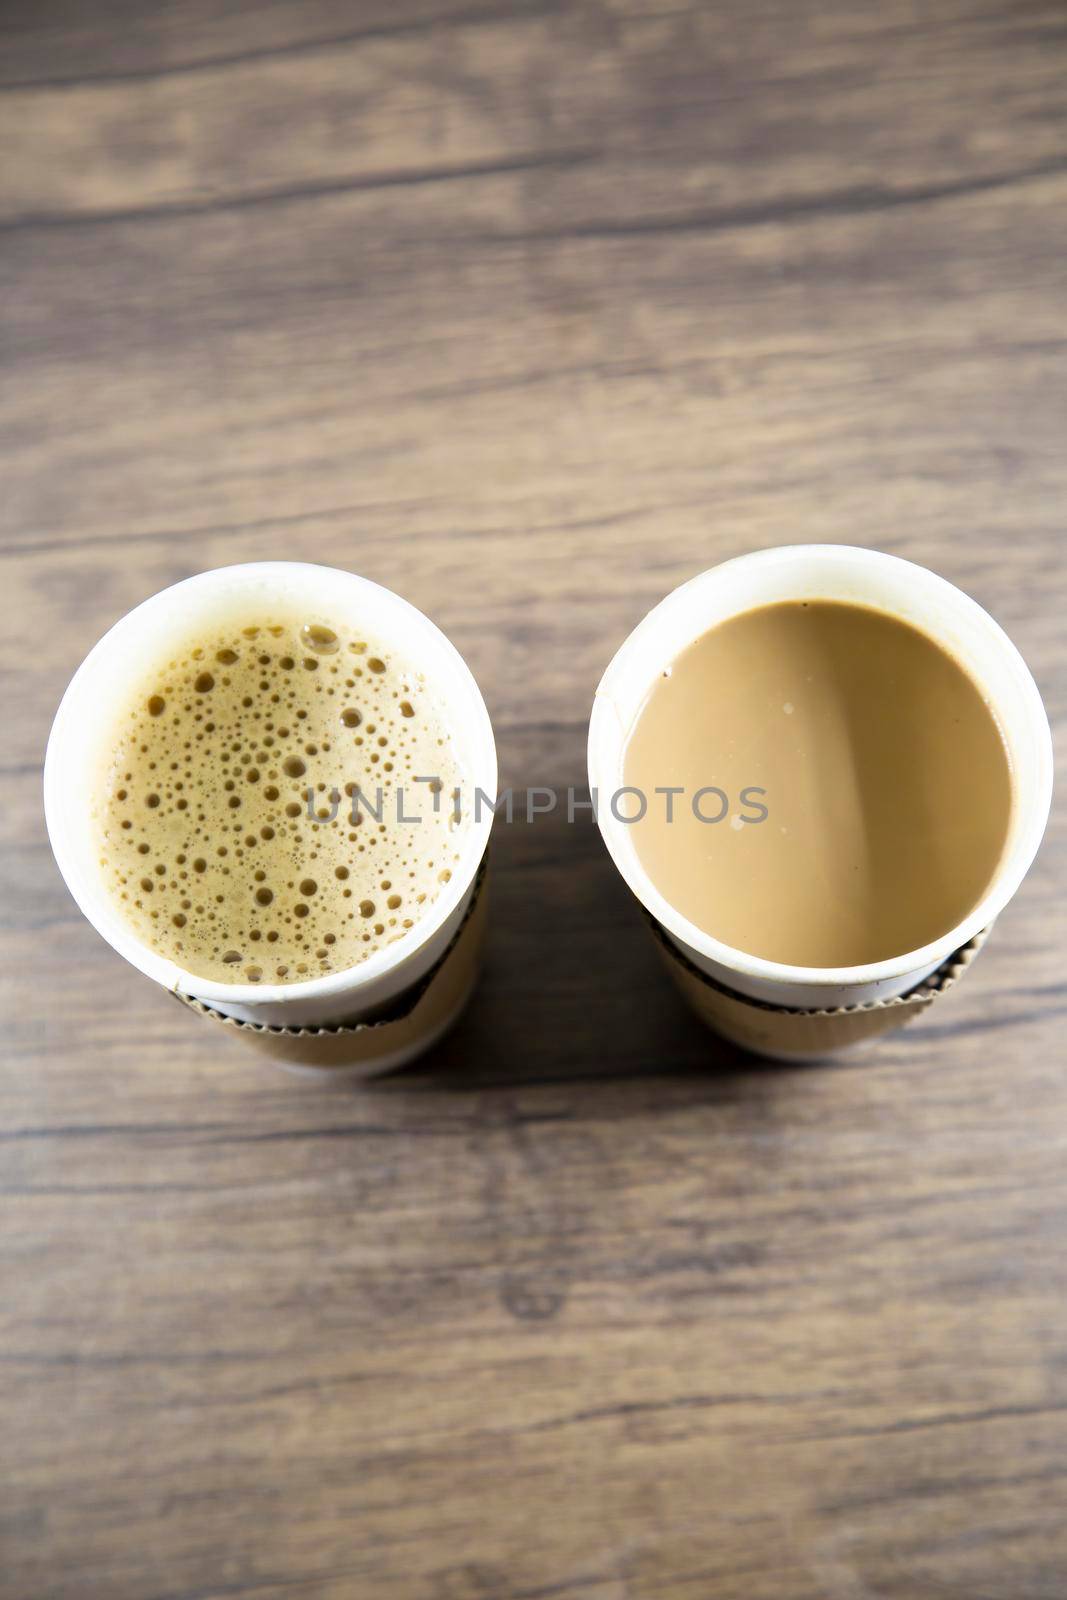 Macchiato and latte in carry out cups on a wooden table